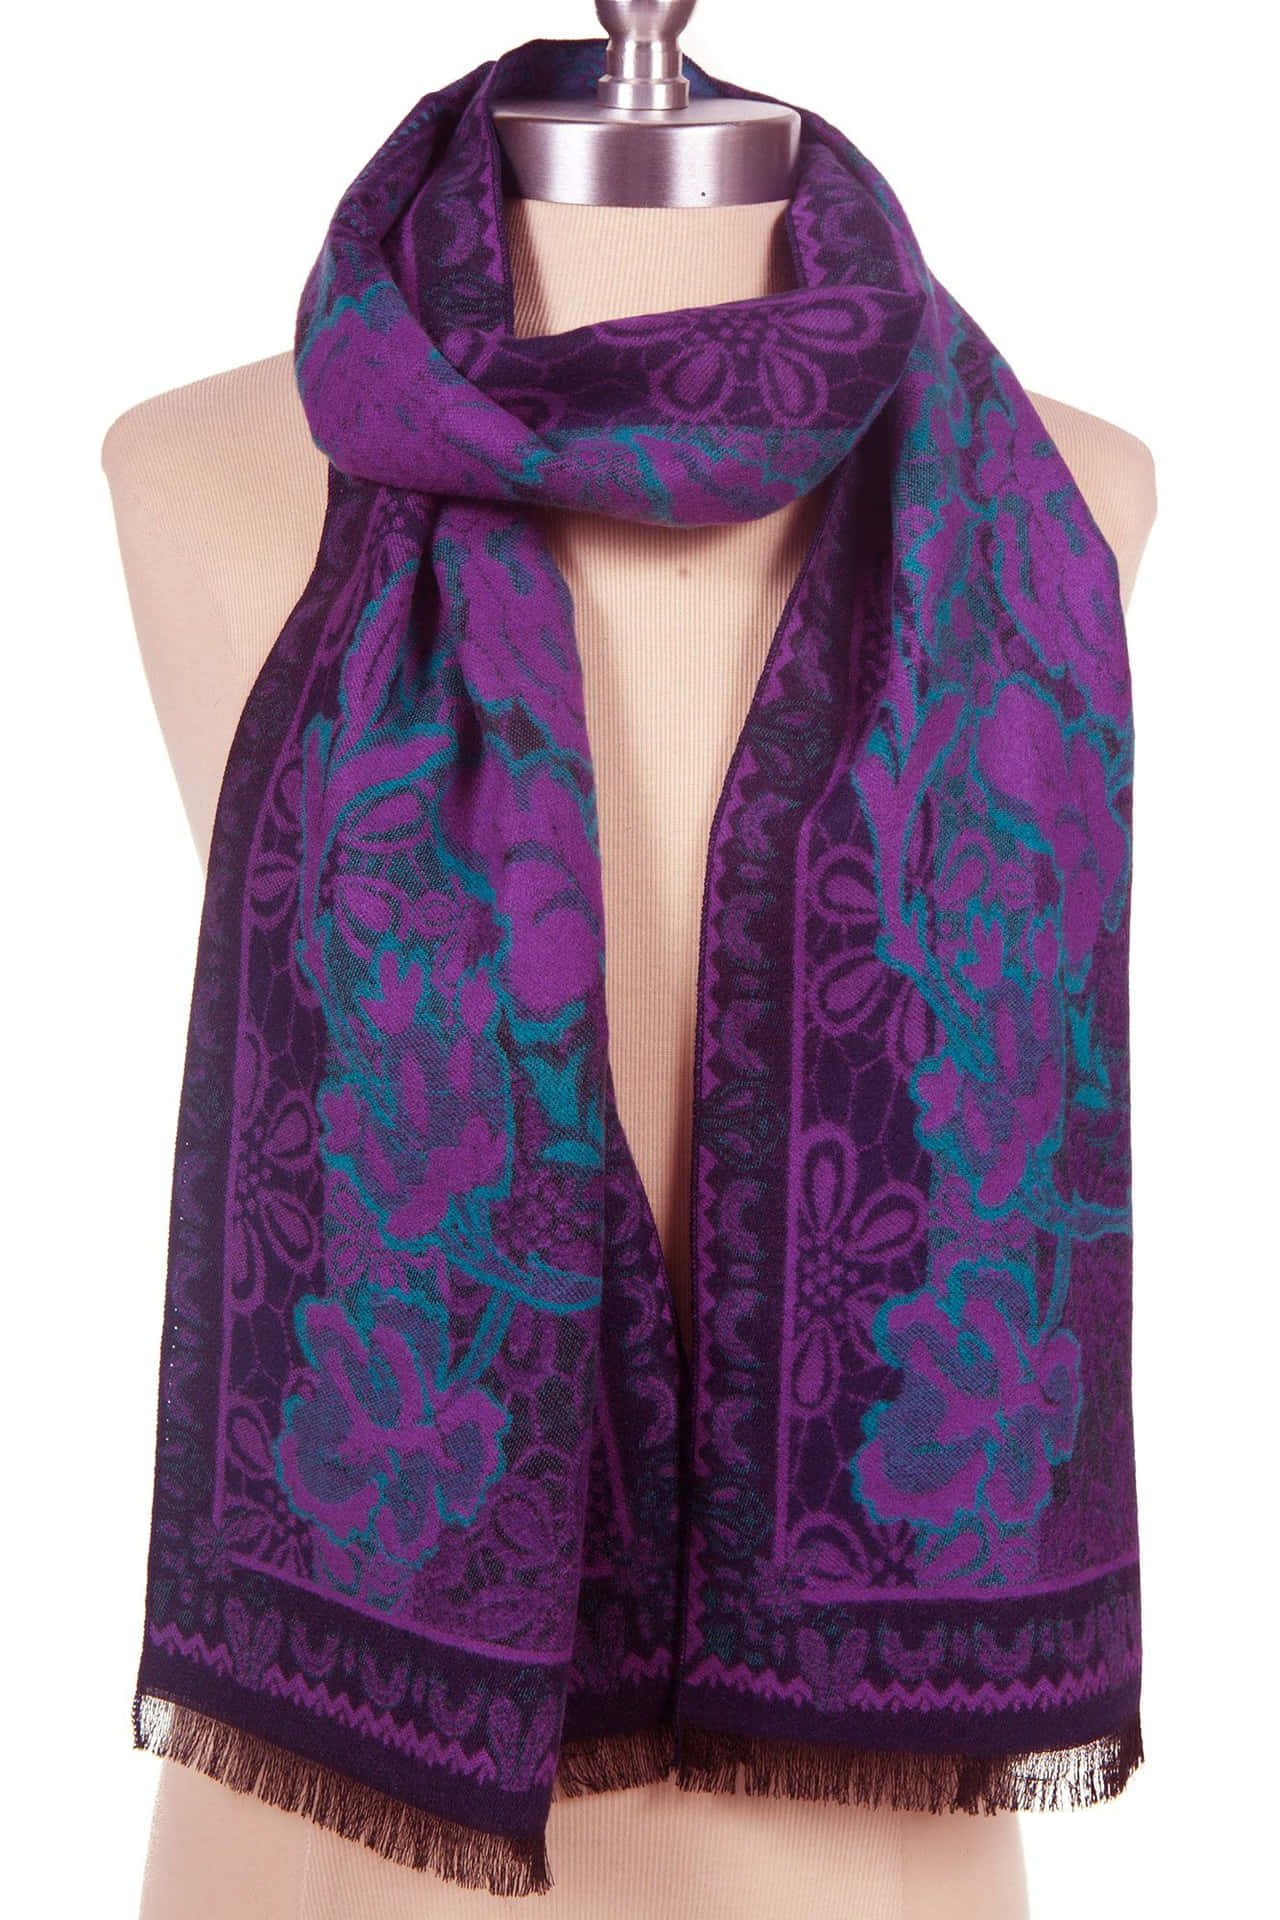 Add a stylish touch to your look with a classic Purple Scarf Wallpaper